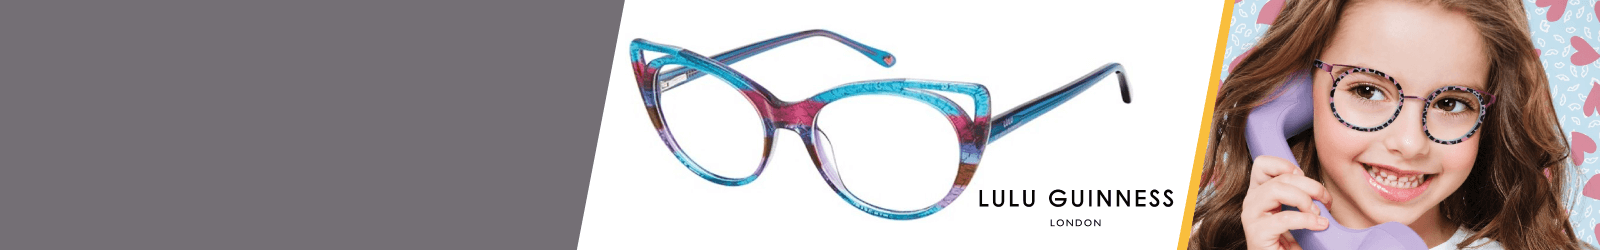 Gold Lulu Guinness Kids Glasses from 2 to 4-year-old